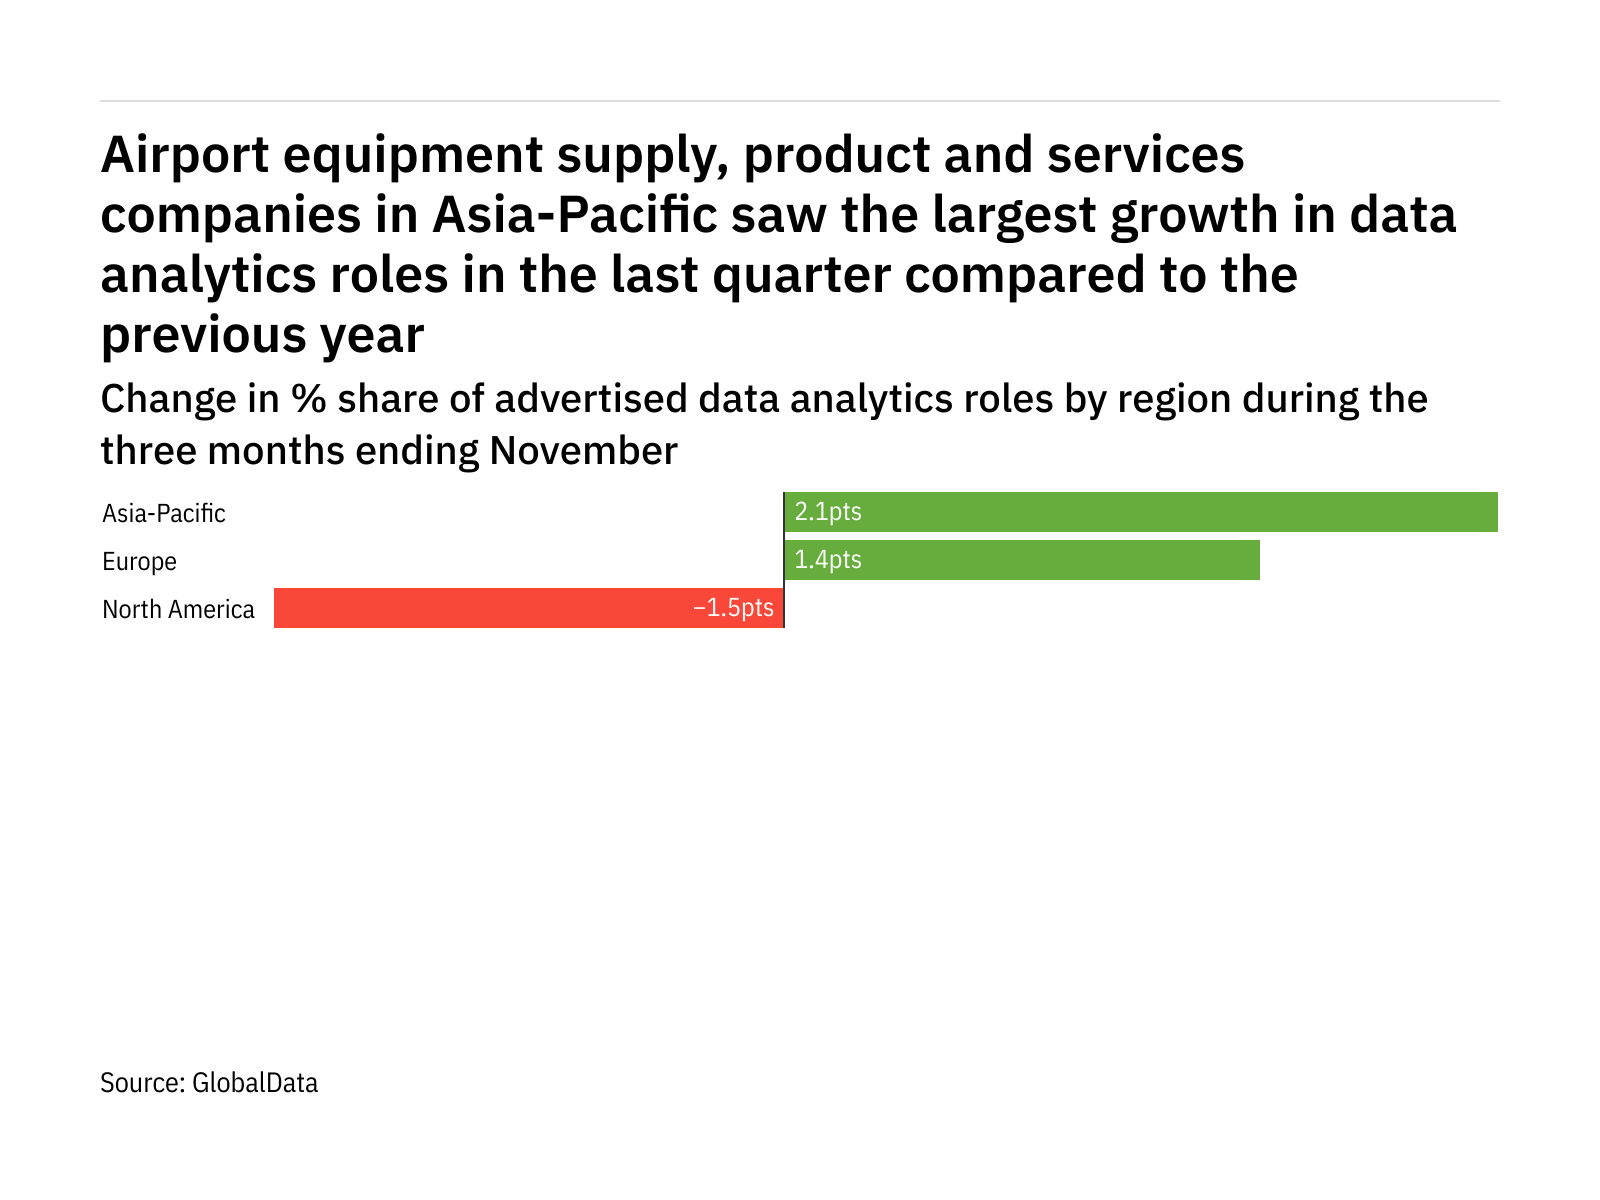 Asia-Pacific is seeing a hiring boom in airport industry data analytics roles